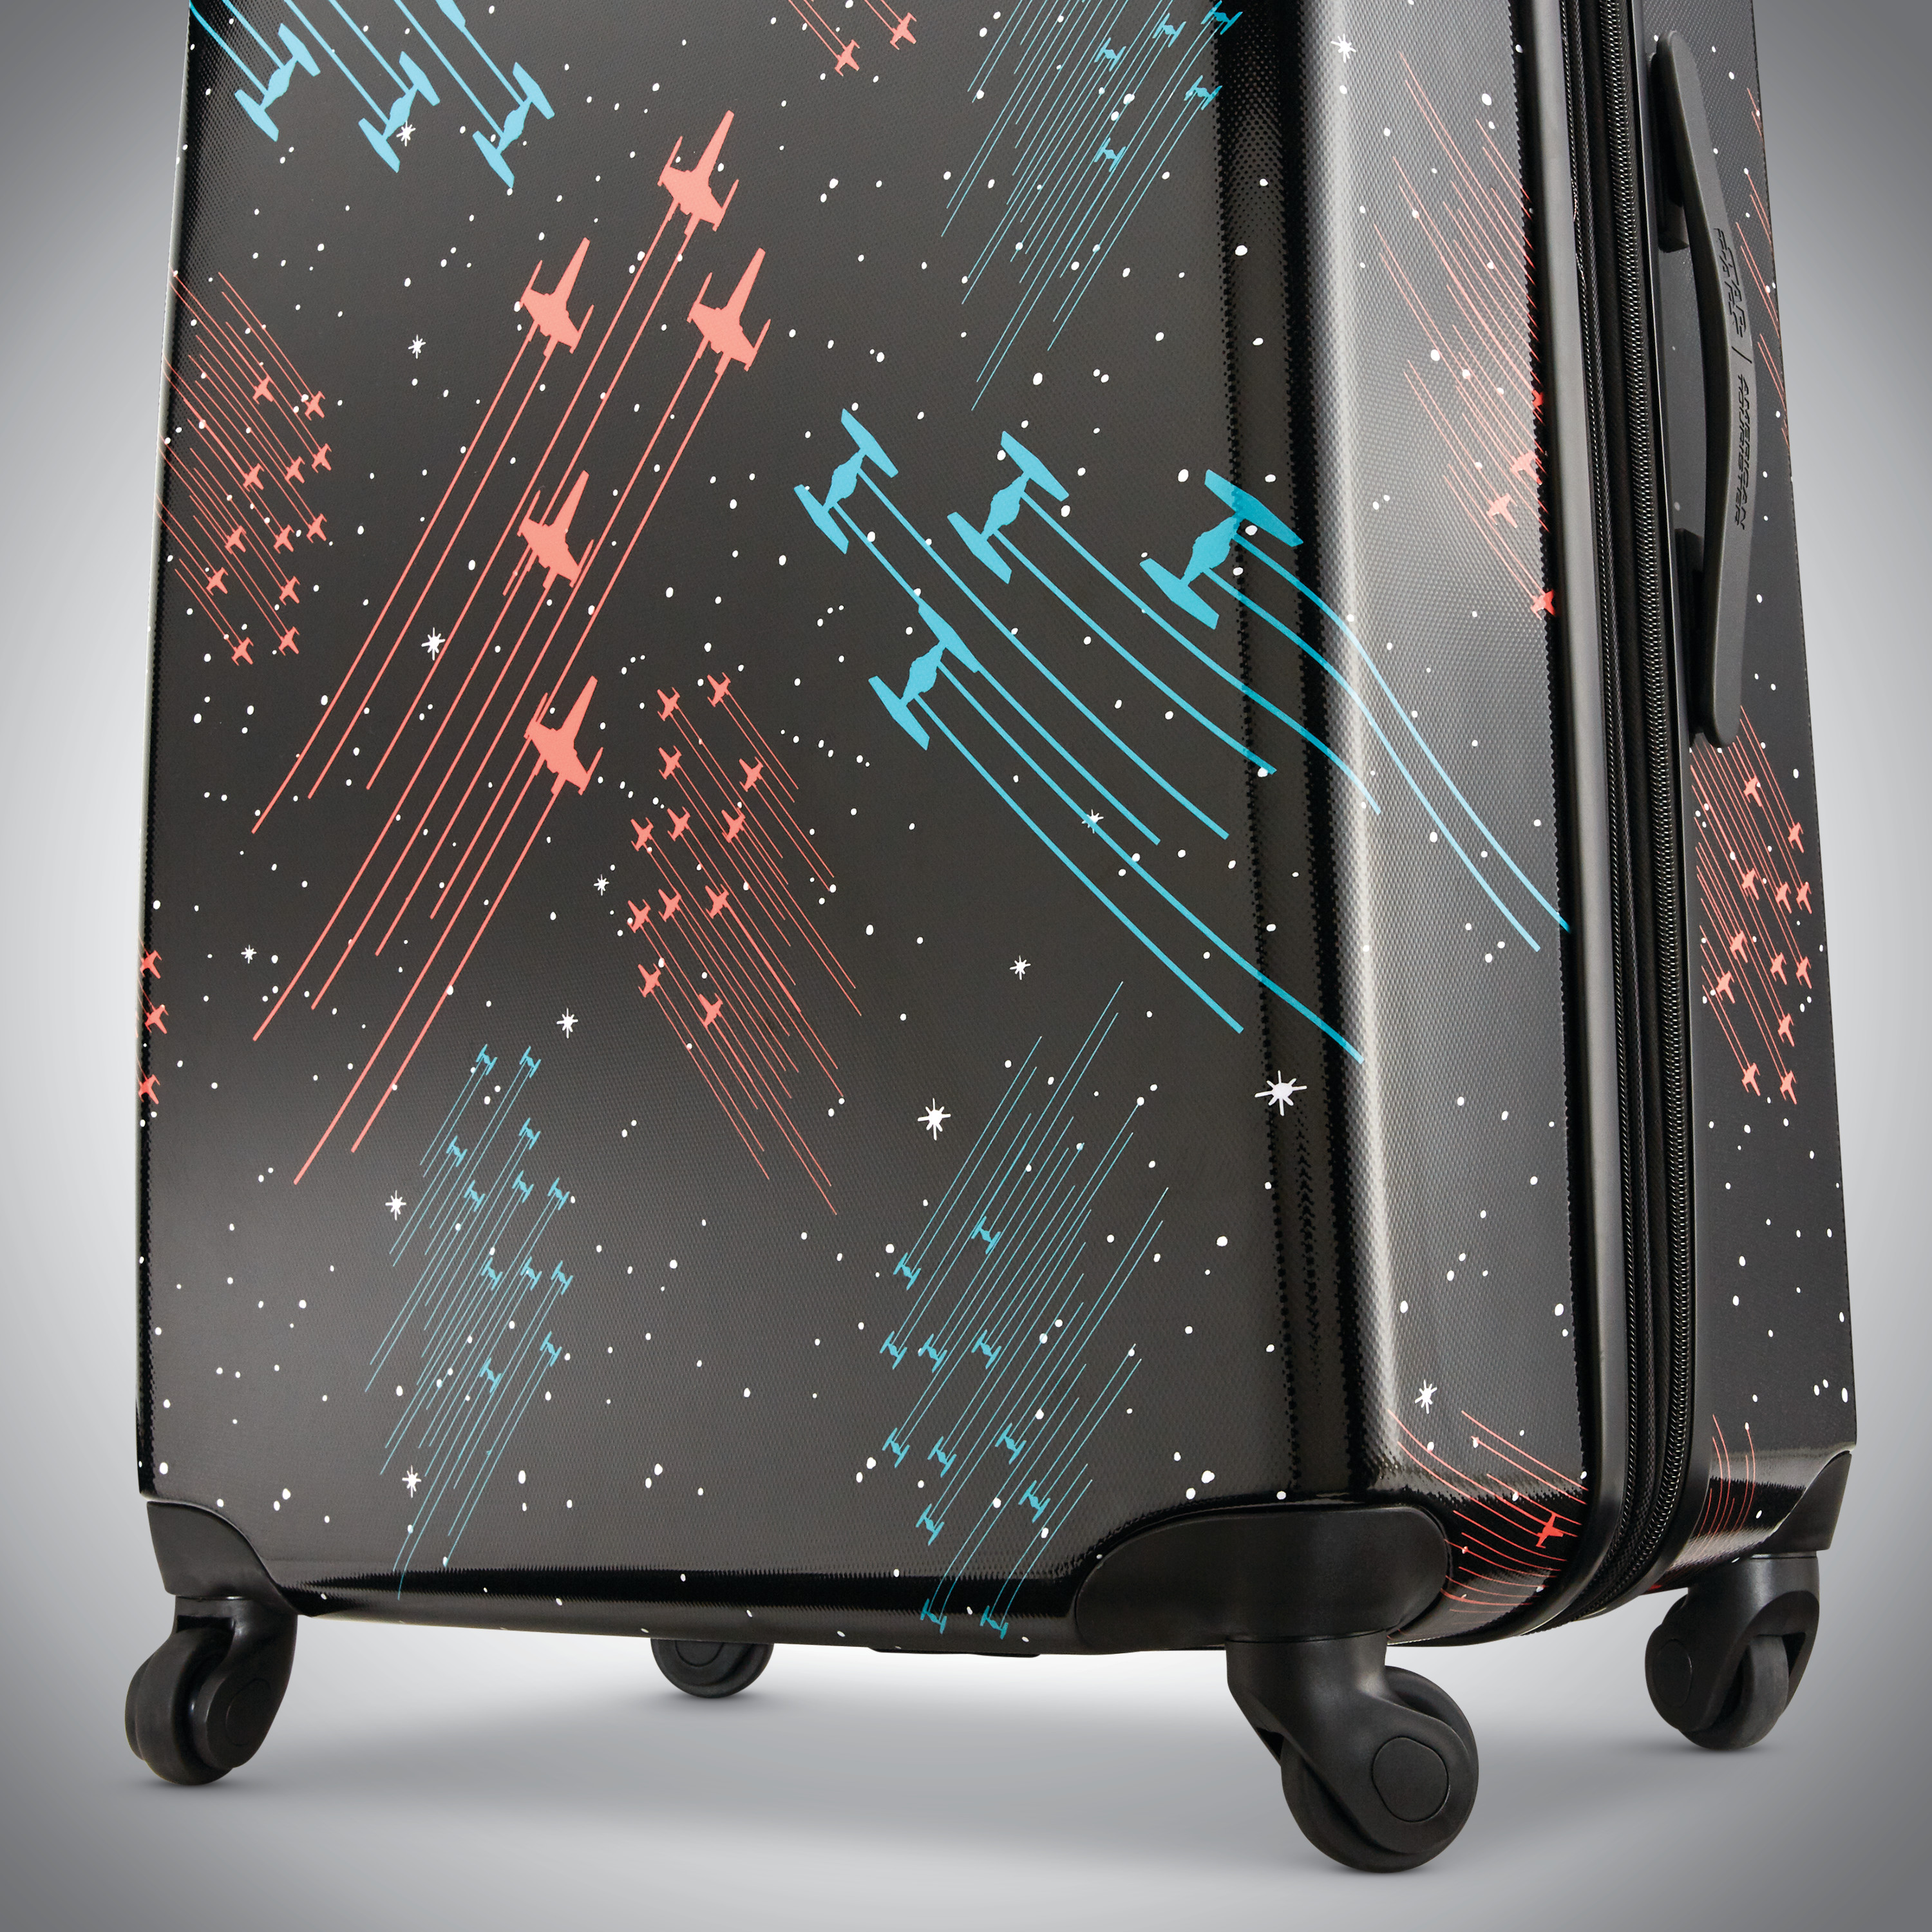 American Tourister Star Wars 21" Hardside Spinner Luggage - image 5 of 7